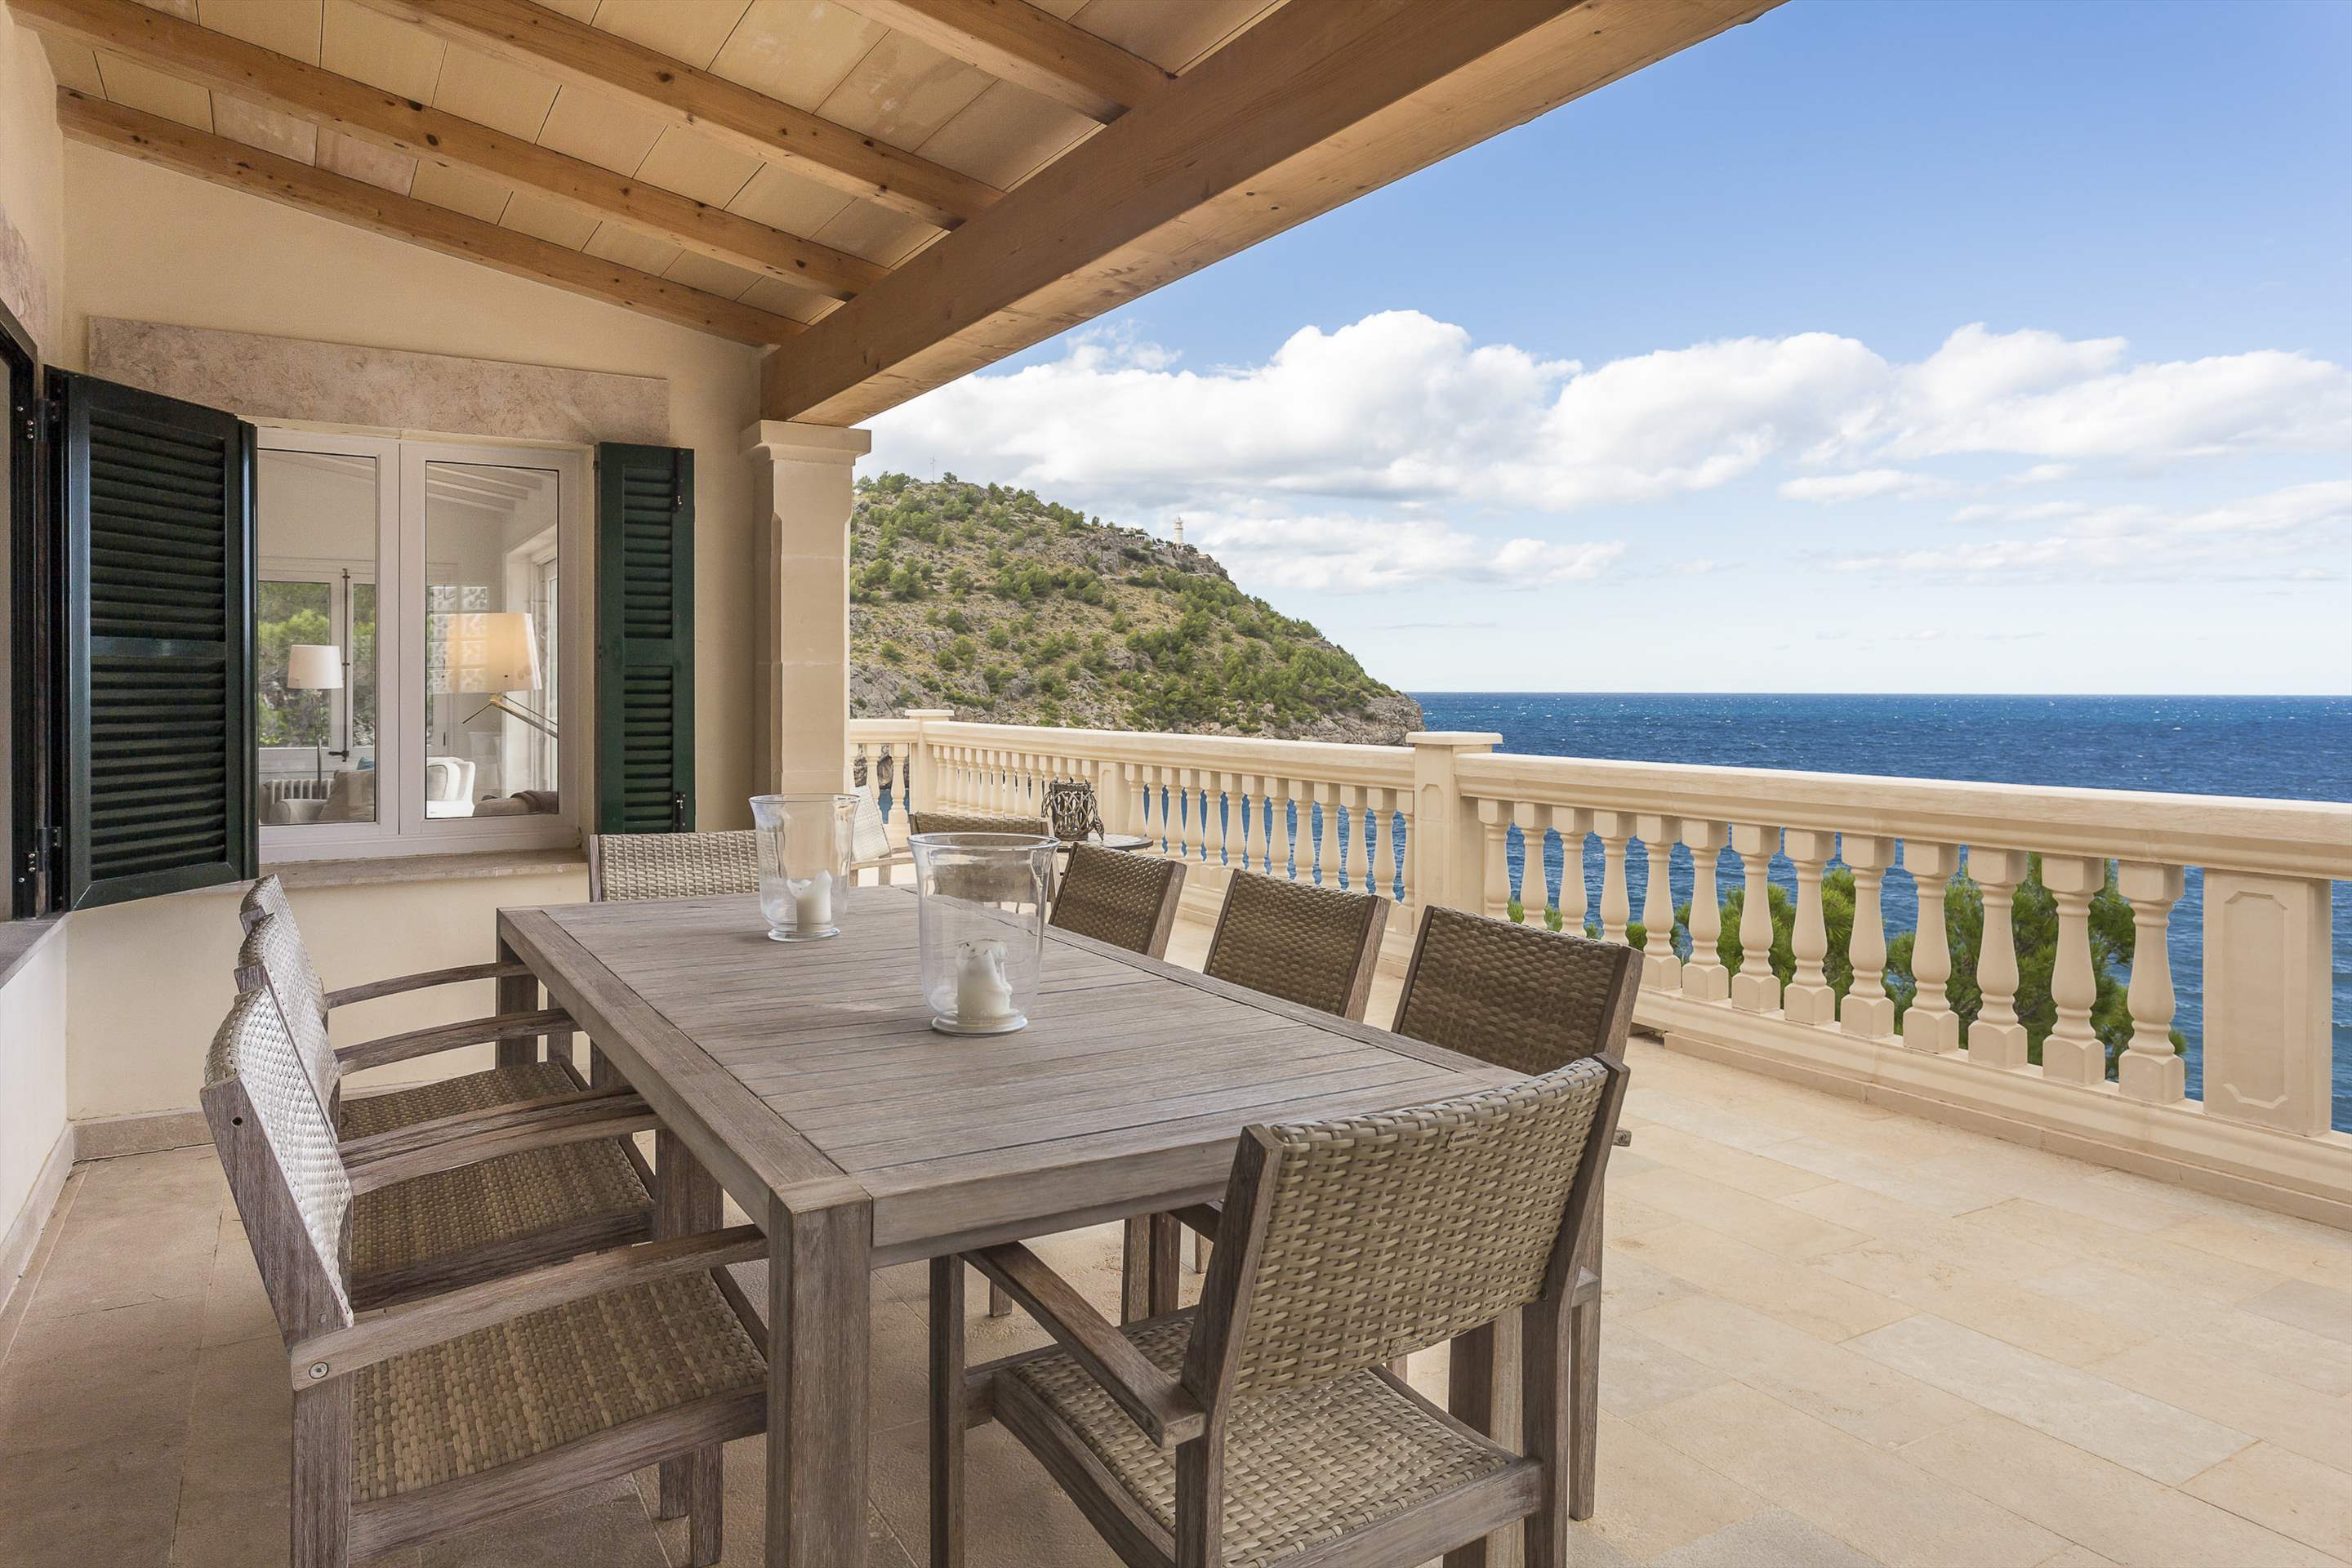 The Port House Up to 6 Persons, 3 bedroom villa in Soller & Deia, Majorca Photo #2